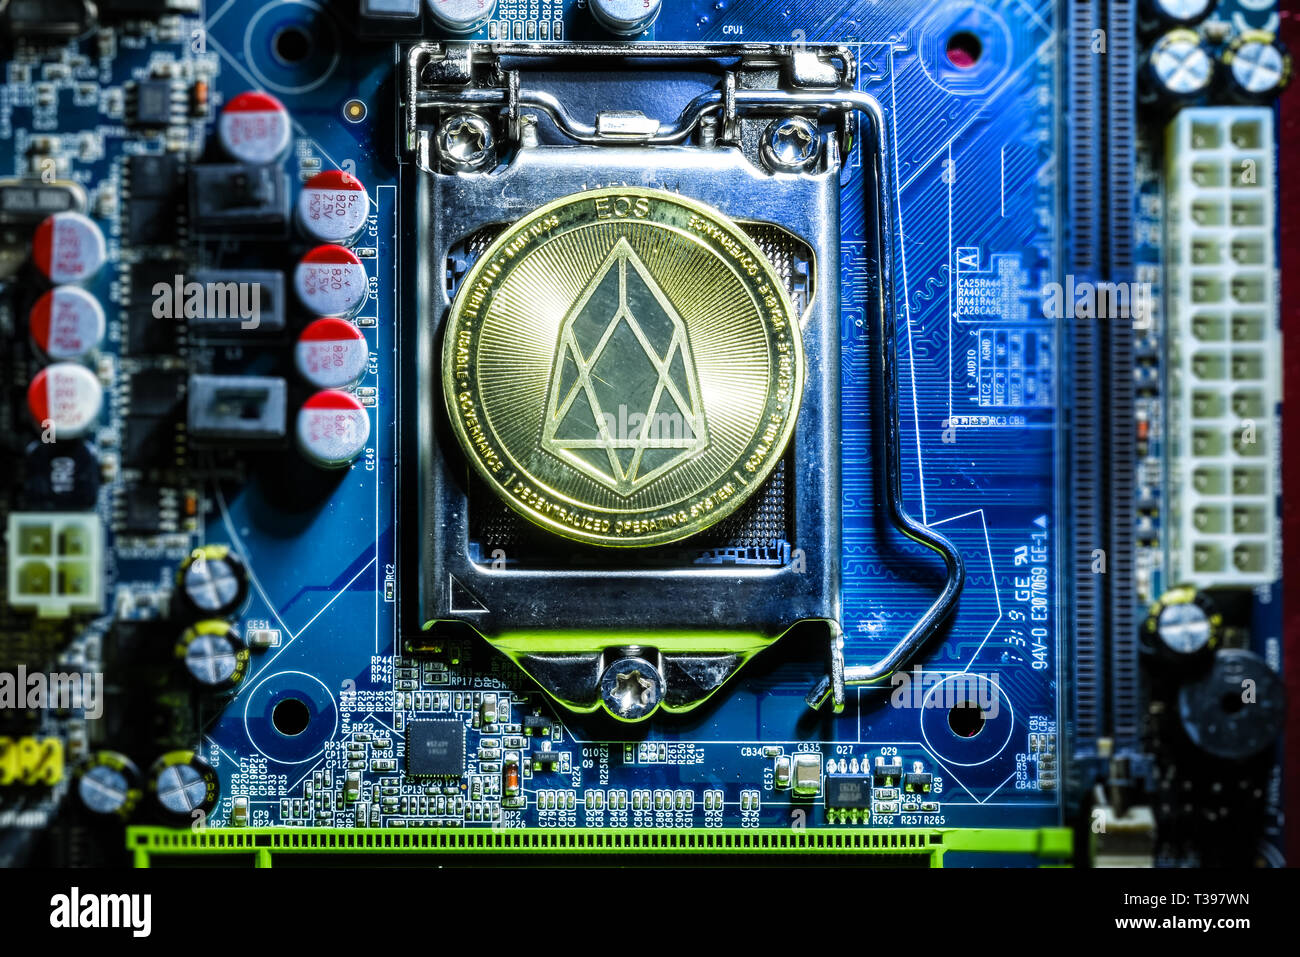 Top view of golden Eos cryptocurrency physical coin on computer mother board processor.Bitcoin mining farm, working computer equipment concept. Stock Photo